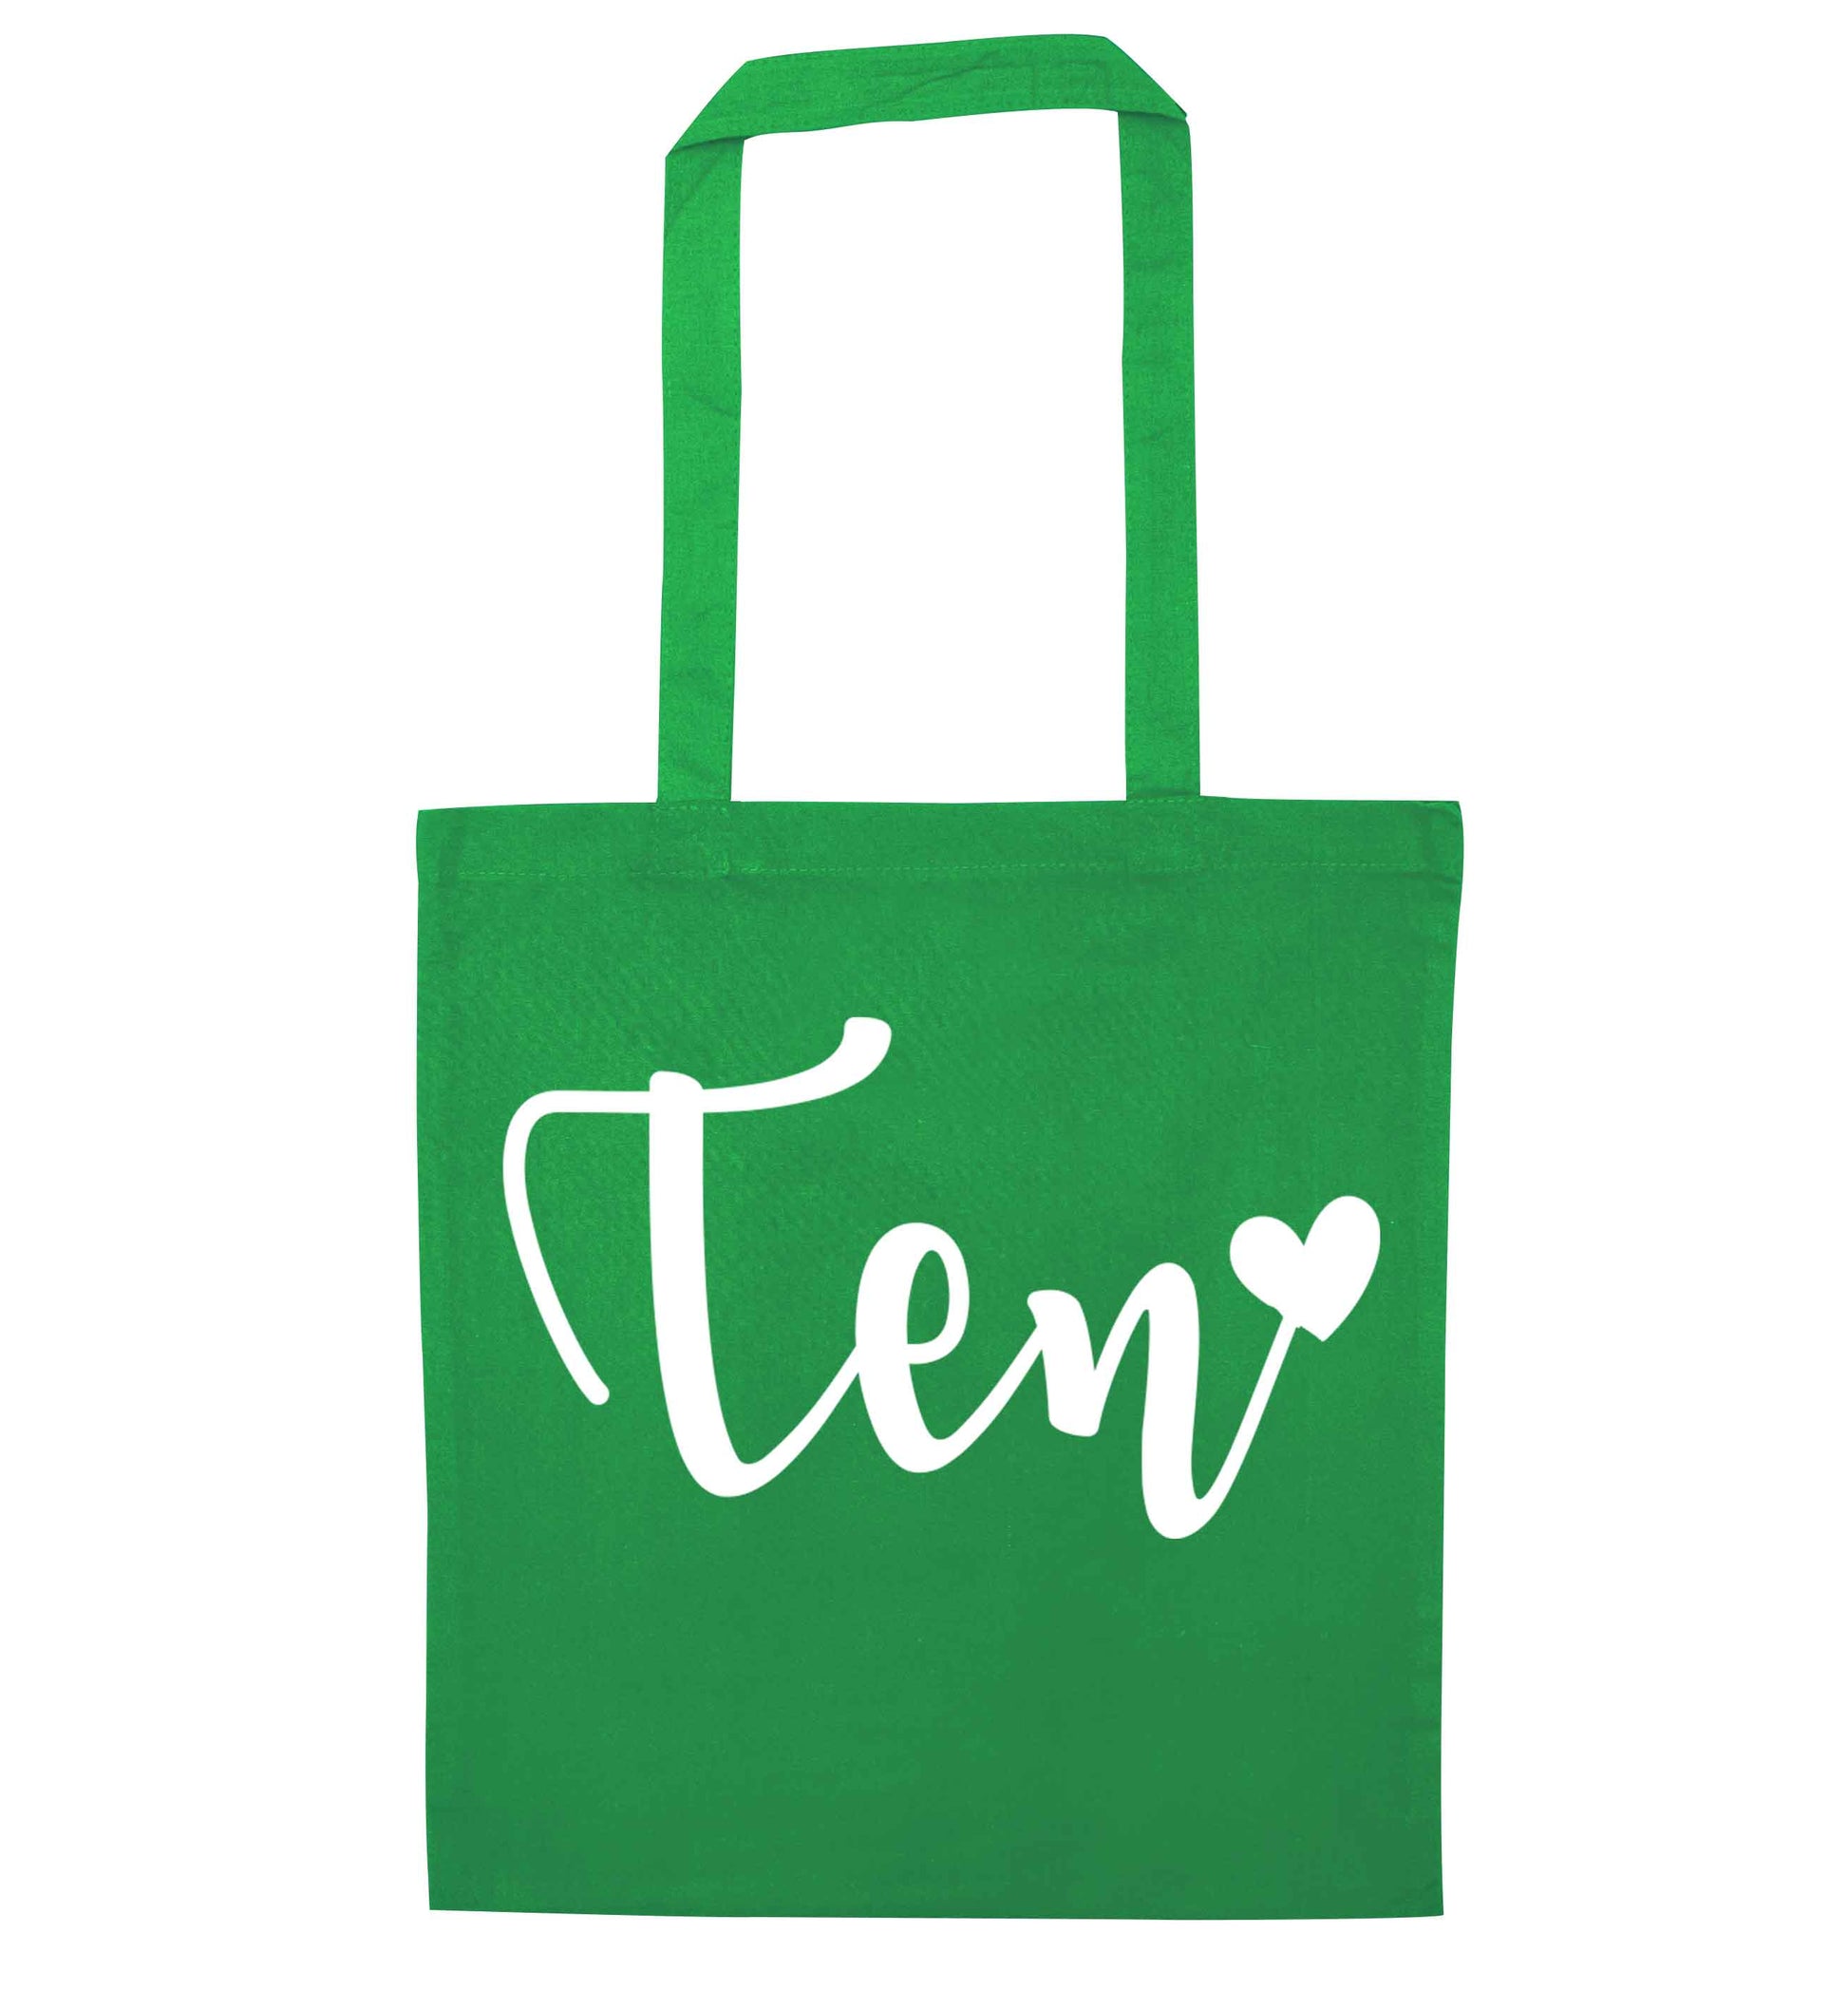 Ten and heart green tote bag